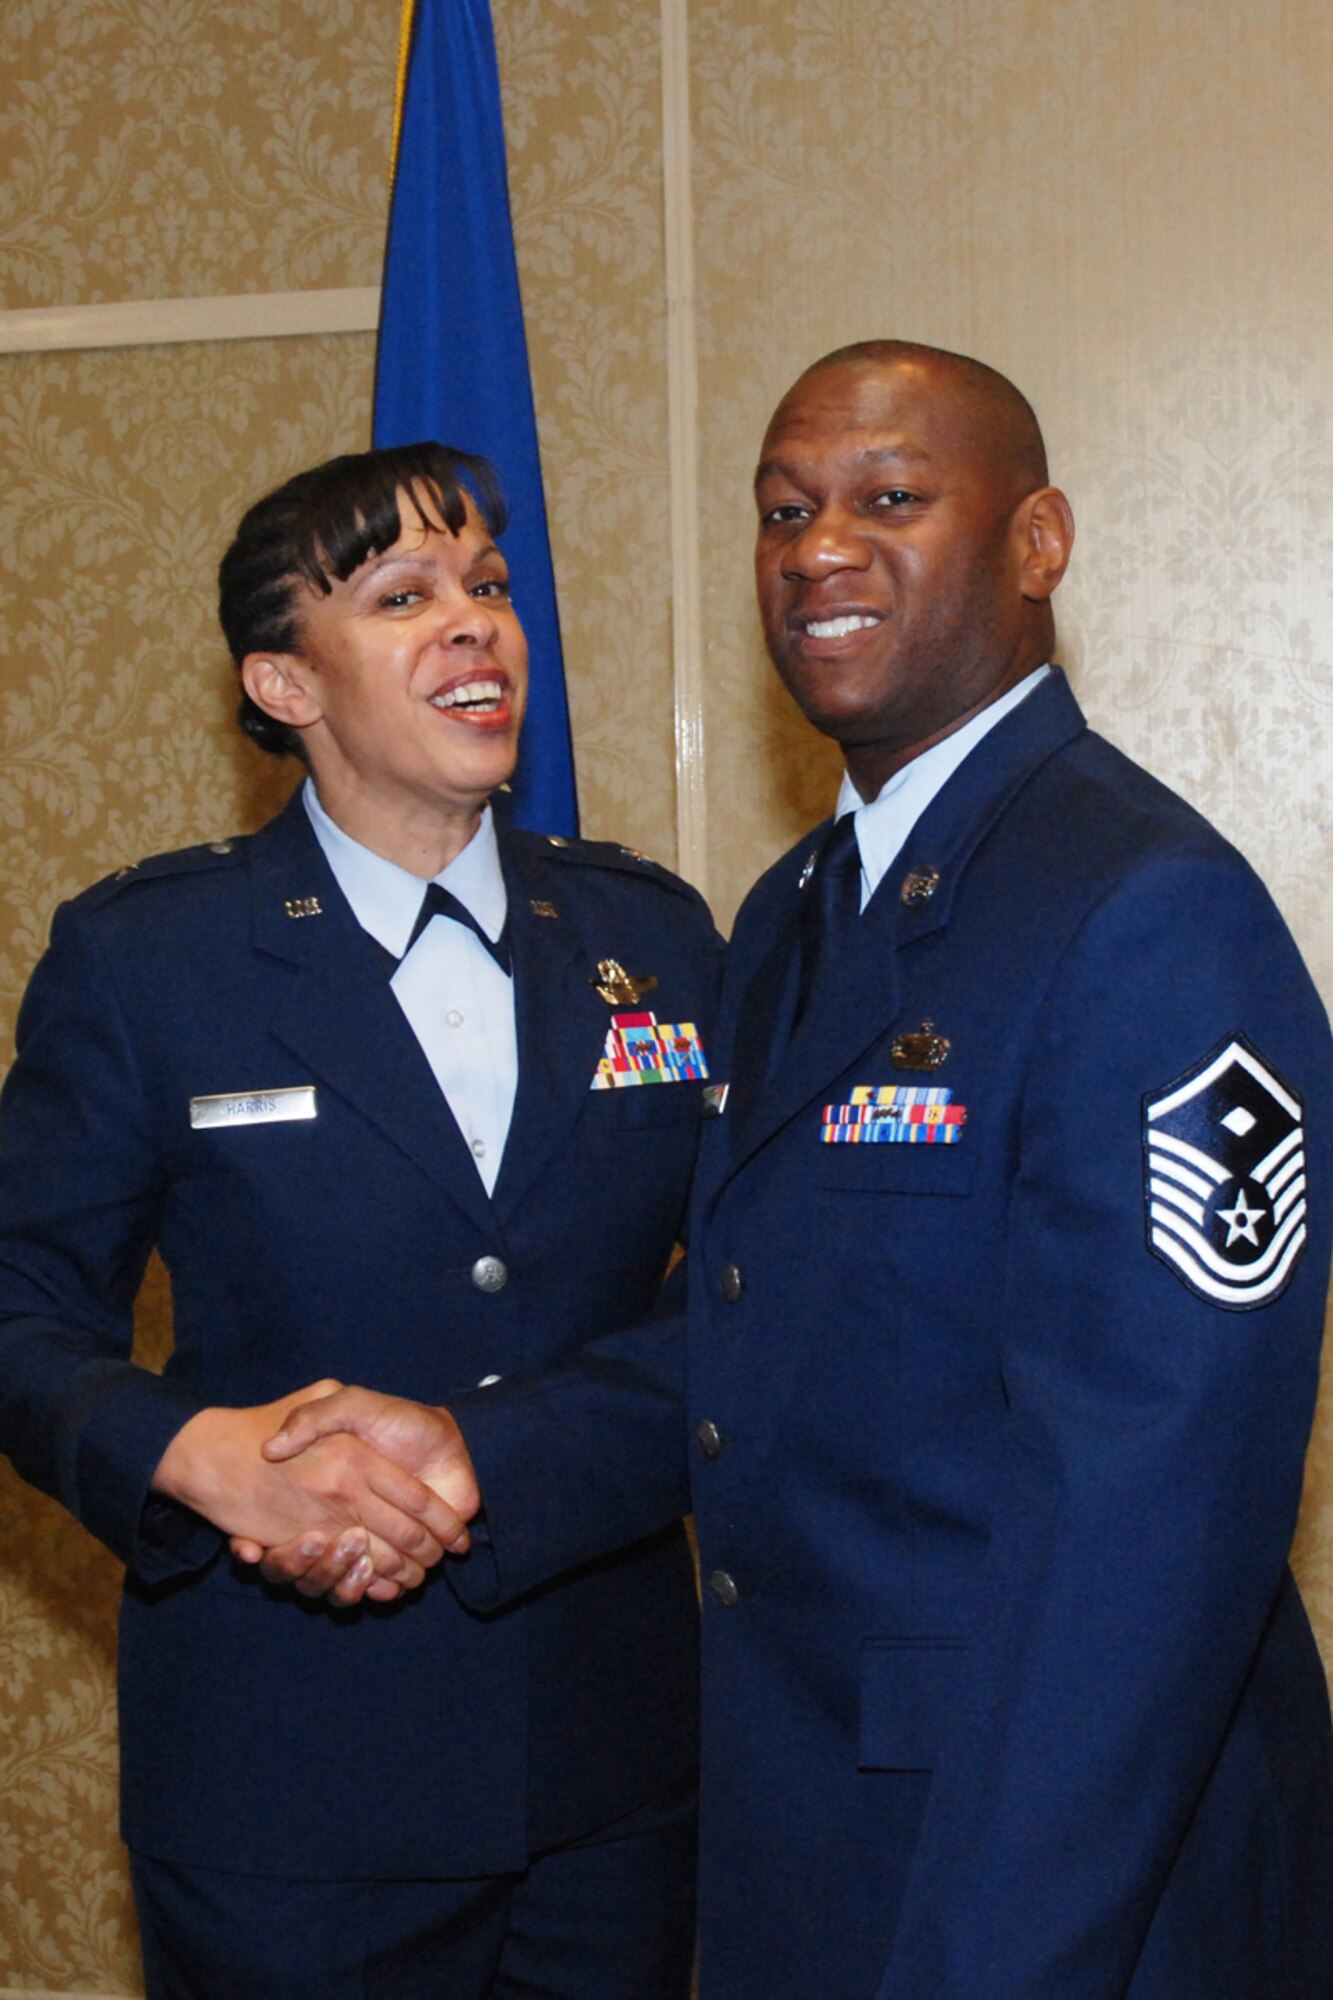 Master Sgt. Carl VanDiver, 700th Airlift Squadron first sergeant, congratulates Brig. Gen. Stayce D. Harris during her promotion ceremony at the 2009 Tuskegee Airman National Convention in Las Vegas, Nev., Aug. 8. General Harris is the highest ranking African American female aviator in the Air Force. (U.S. Air Force photo/Tech. Sgt. James Branch)